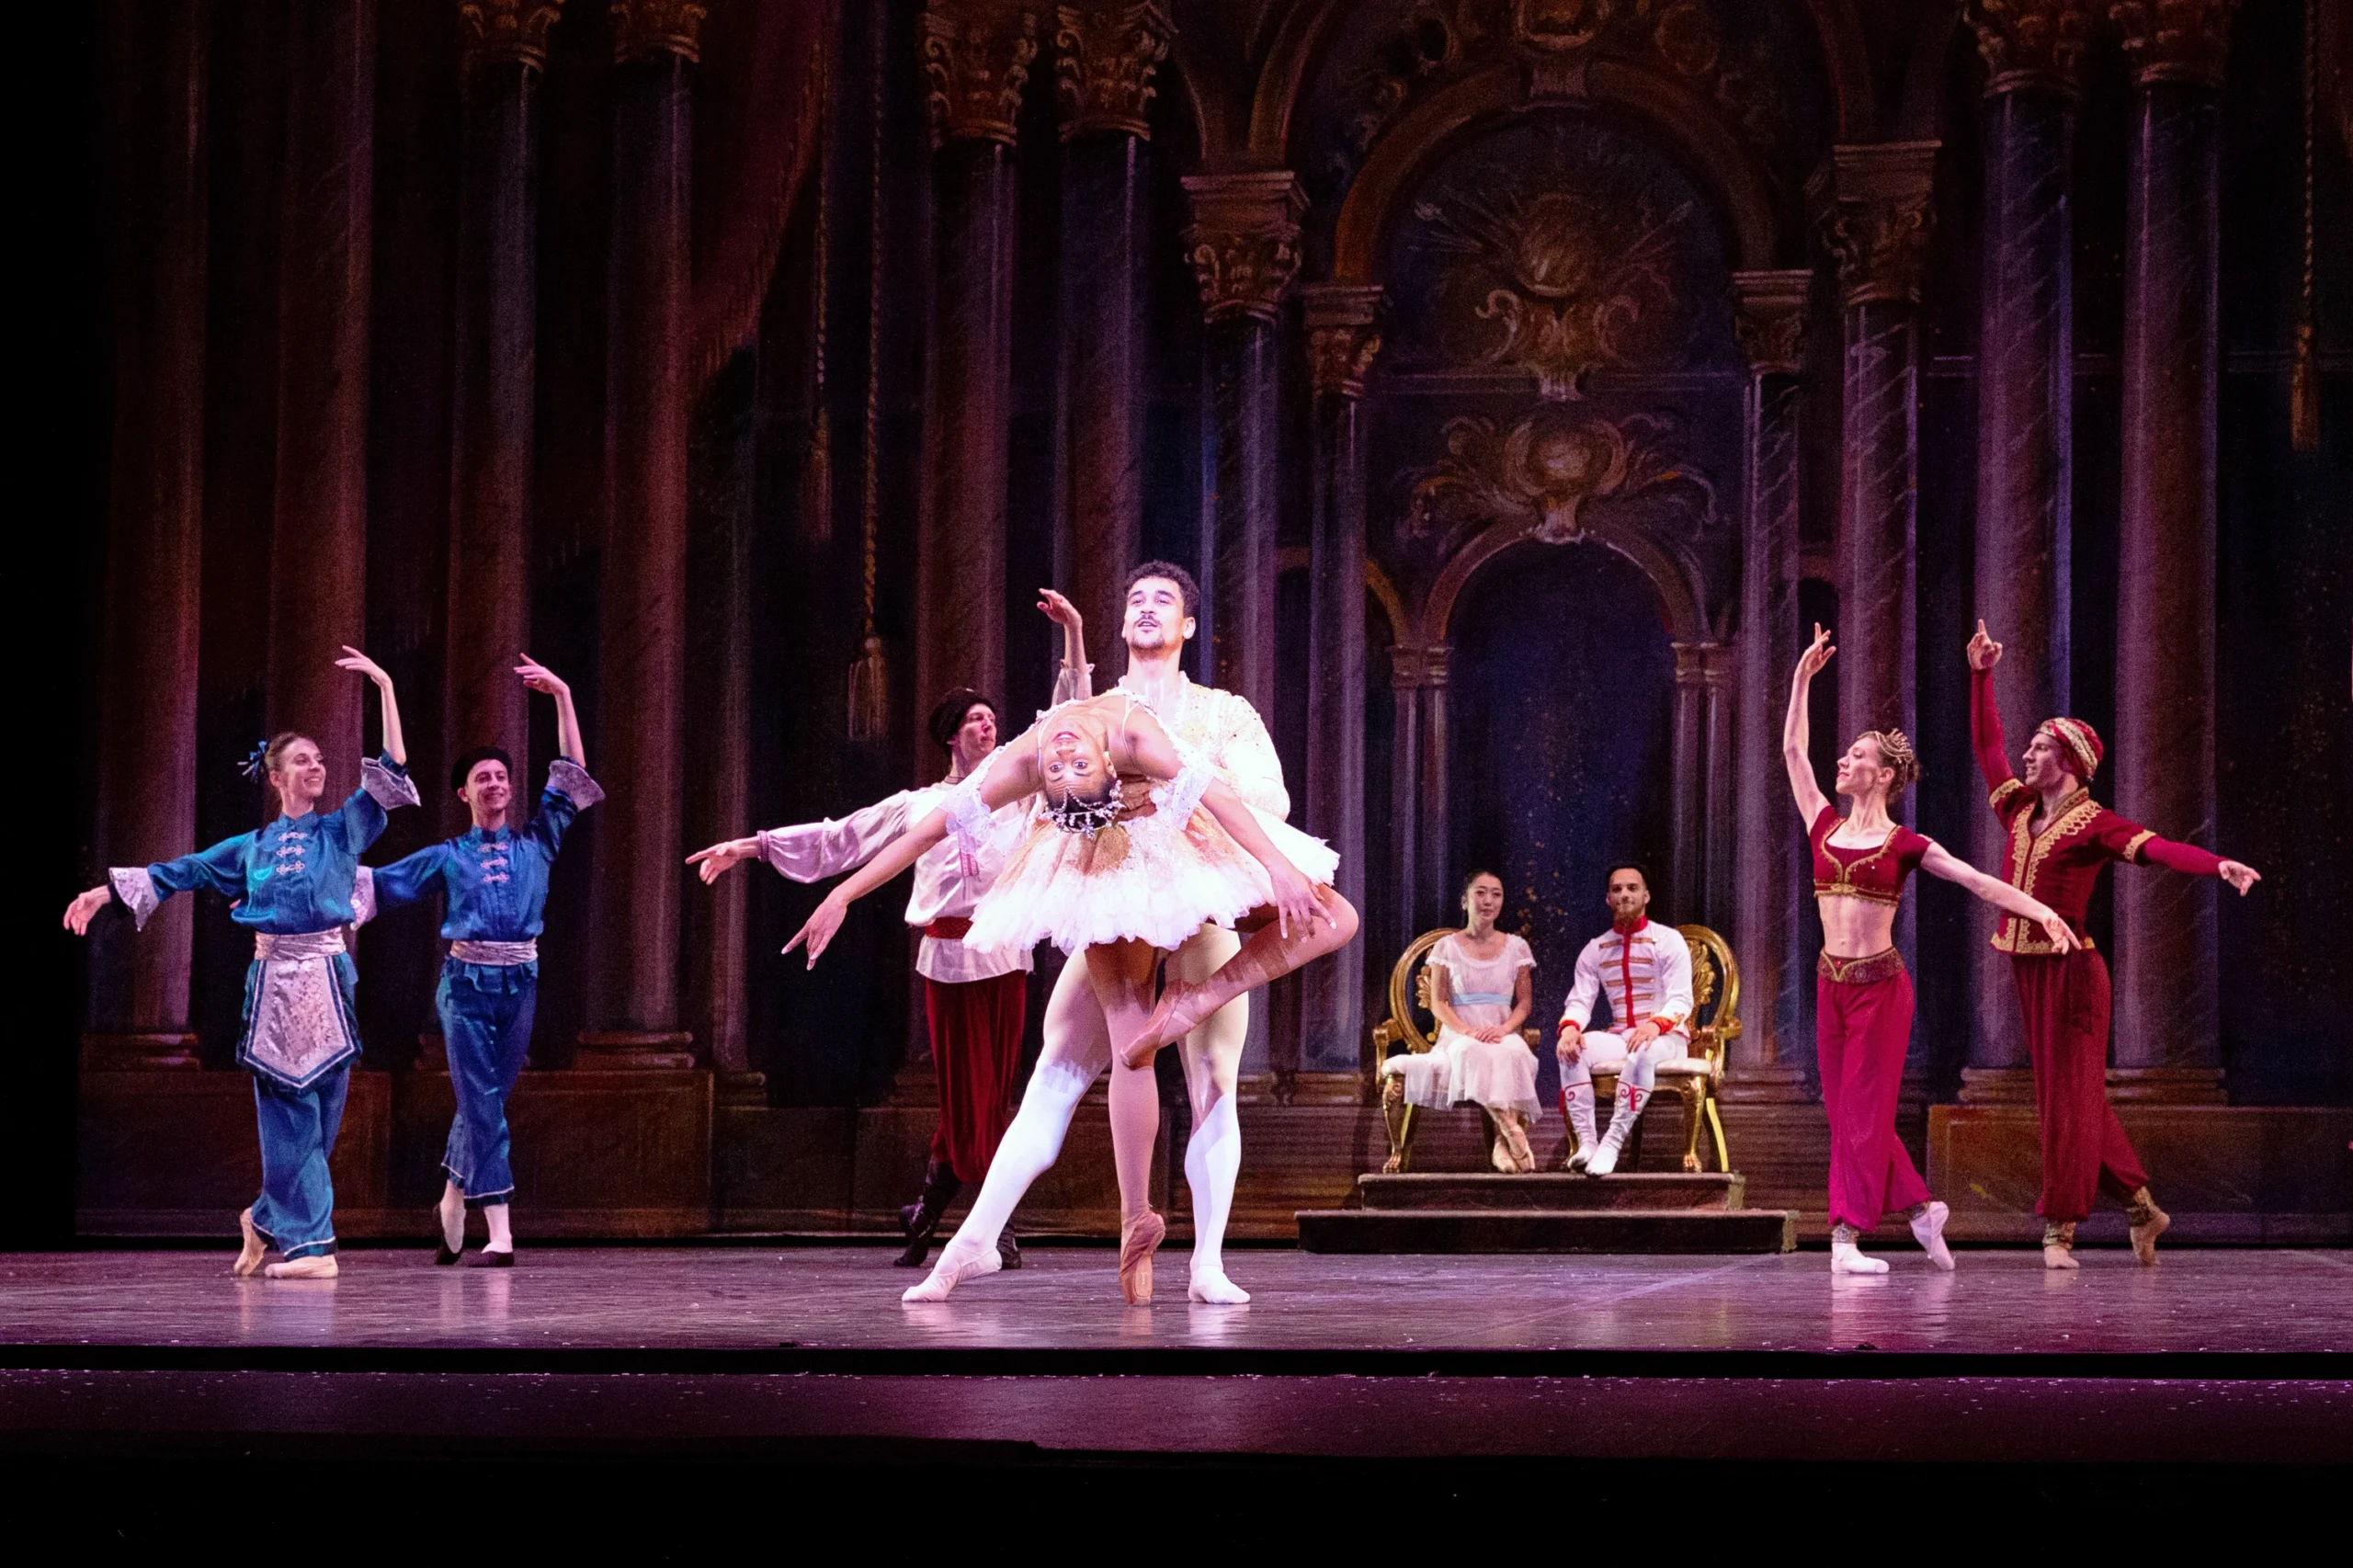 A large cast of dancers poses during a performance of Nutcracker. A ballerina portraying the Sugar Plum Fairy and her male partner stand center stage—he holds her waist as she stands facing him on pointe and does a deep backbend with her left leg in passé. She wears a pink tutu, brown tights and brown pointe shoes, while he wears white tights and slippers, and a white tunic. A male and female dancer sit in gilded chairs upstage center, while other dancers in various costumes frame the Sugar Plum Fairy and her cavalier in a V shape formation, posed in B plus.